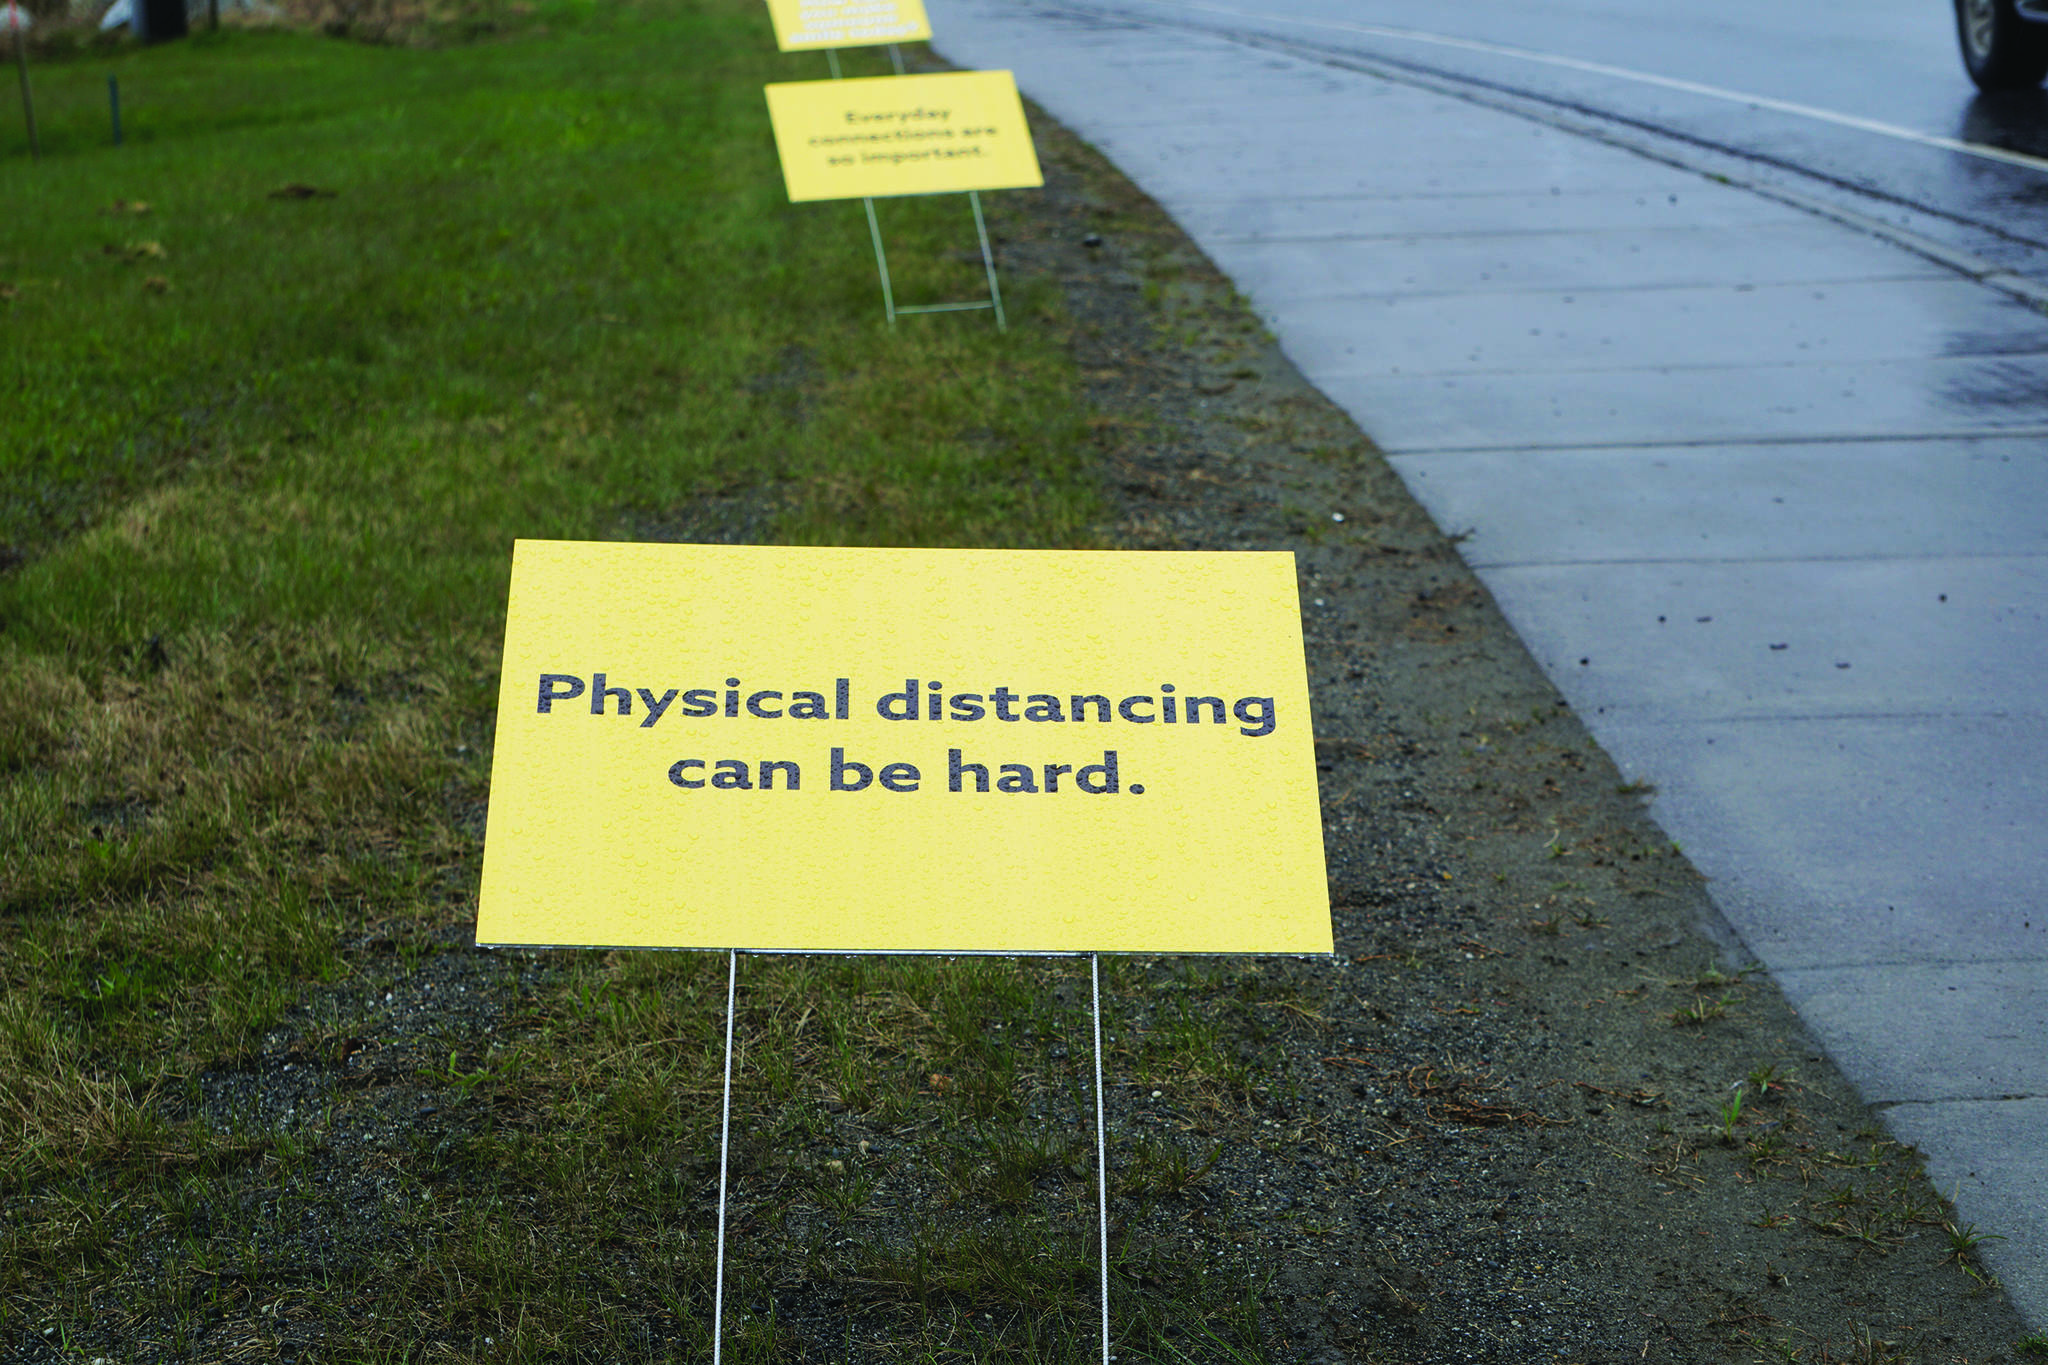 Signs on May 7, 2020, along the Sterling Highway by St. Augustine’s Episcopal Church in Homer, Alaska, and put up by the South Kenai Peninsula Resiliency Coalition offer encouragement during the COVID-19 pandemic. The signs read “Physical distancing can be hard. Everyday connections are so important. How can you make someone smile today?” (Photo by Michael Armstrong/Homer News)